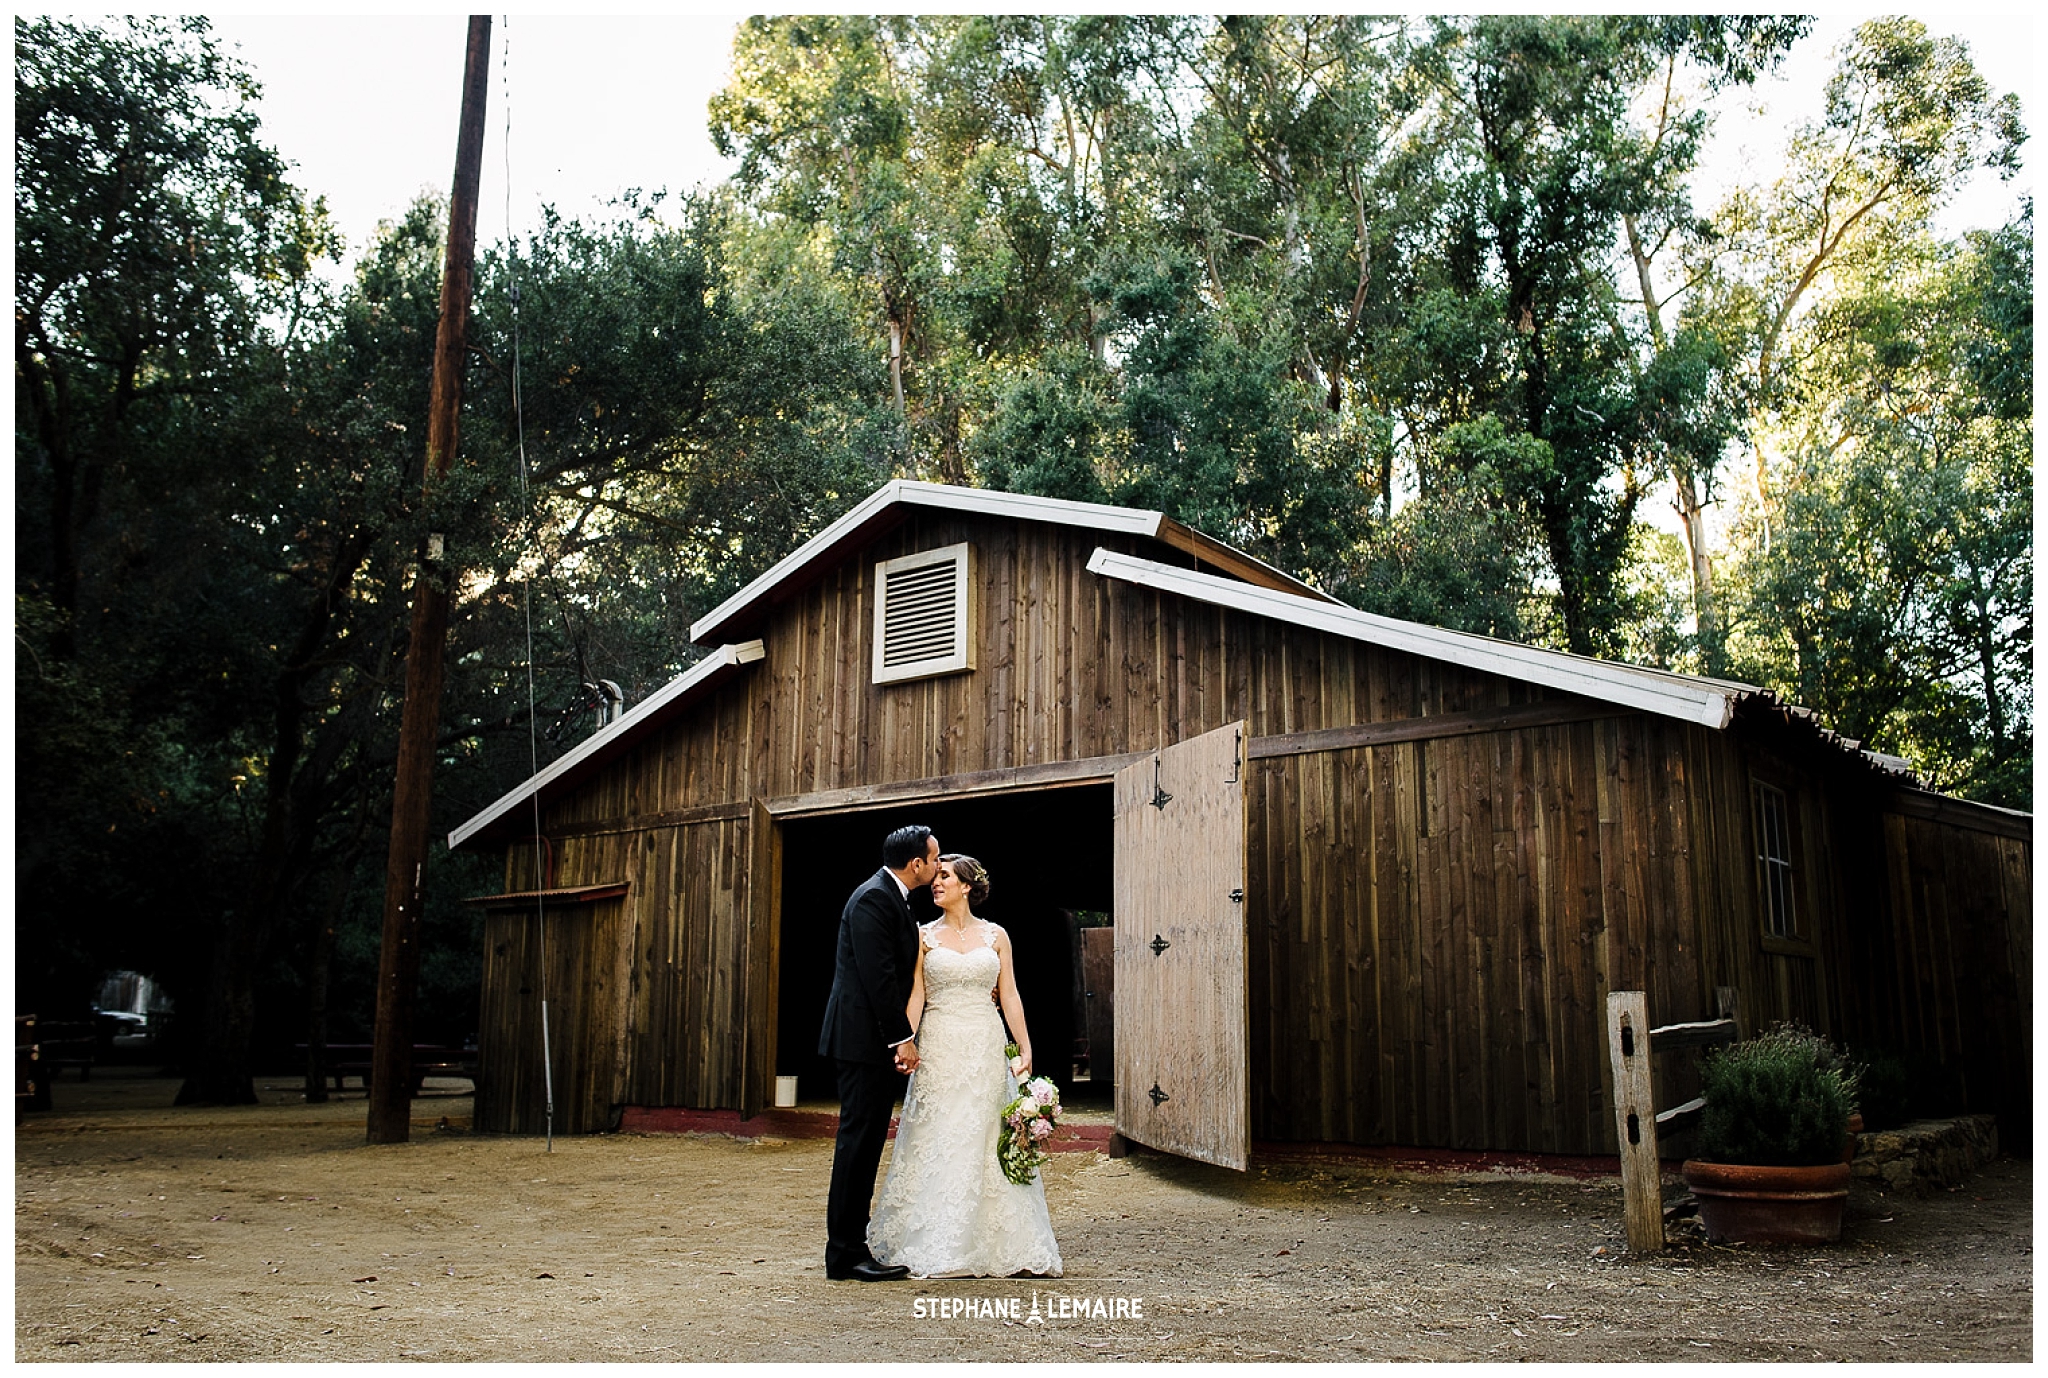 Calamigos Ranch bride and groom portrait by Stephane Lemaire Photography 